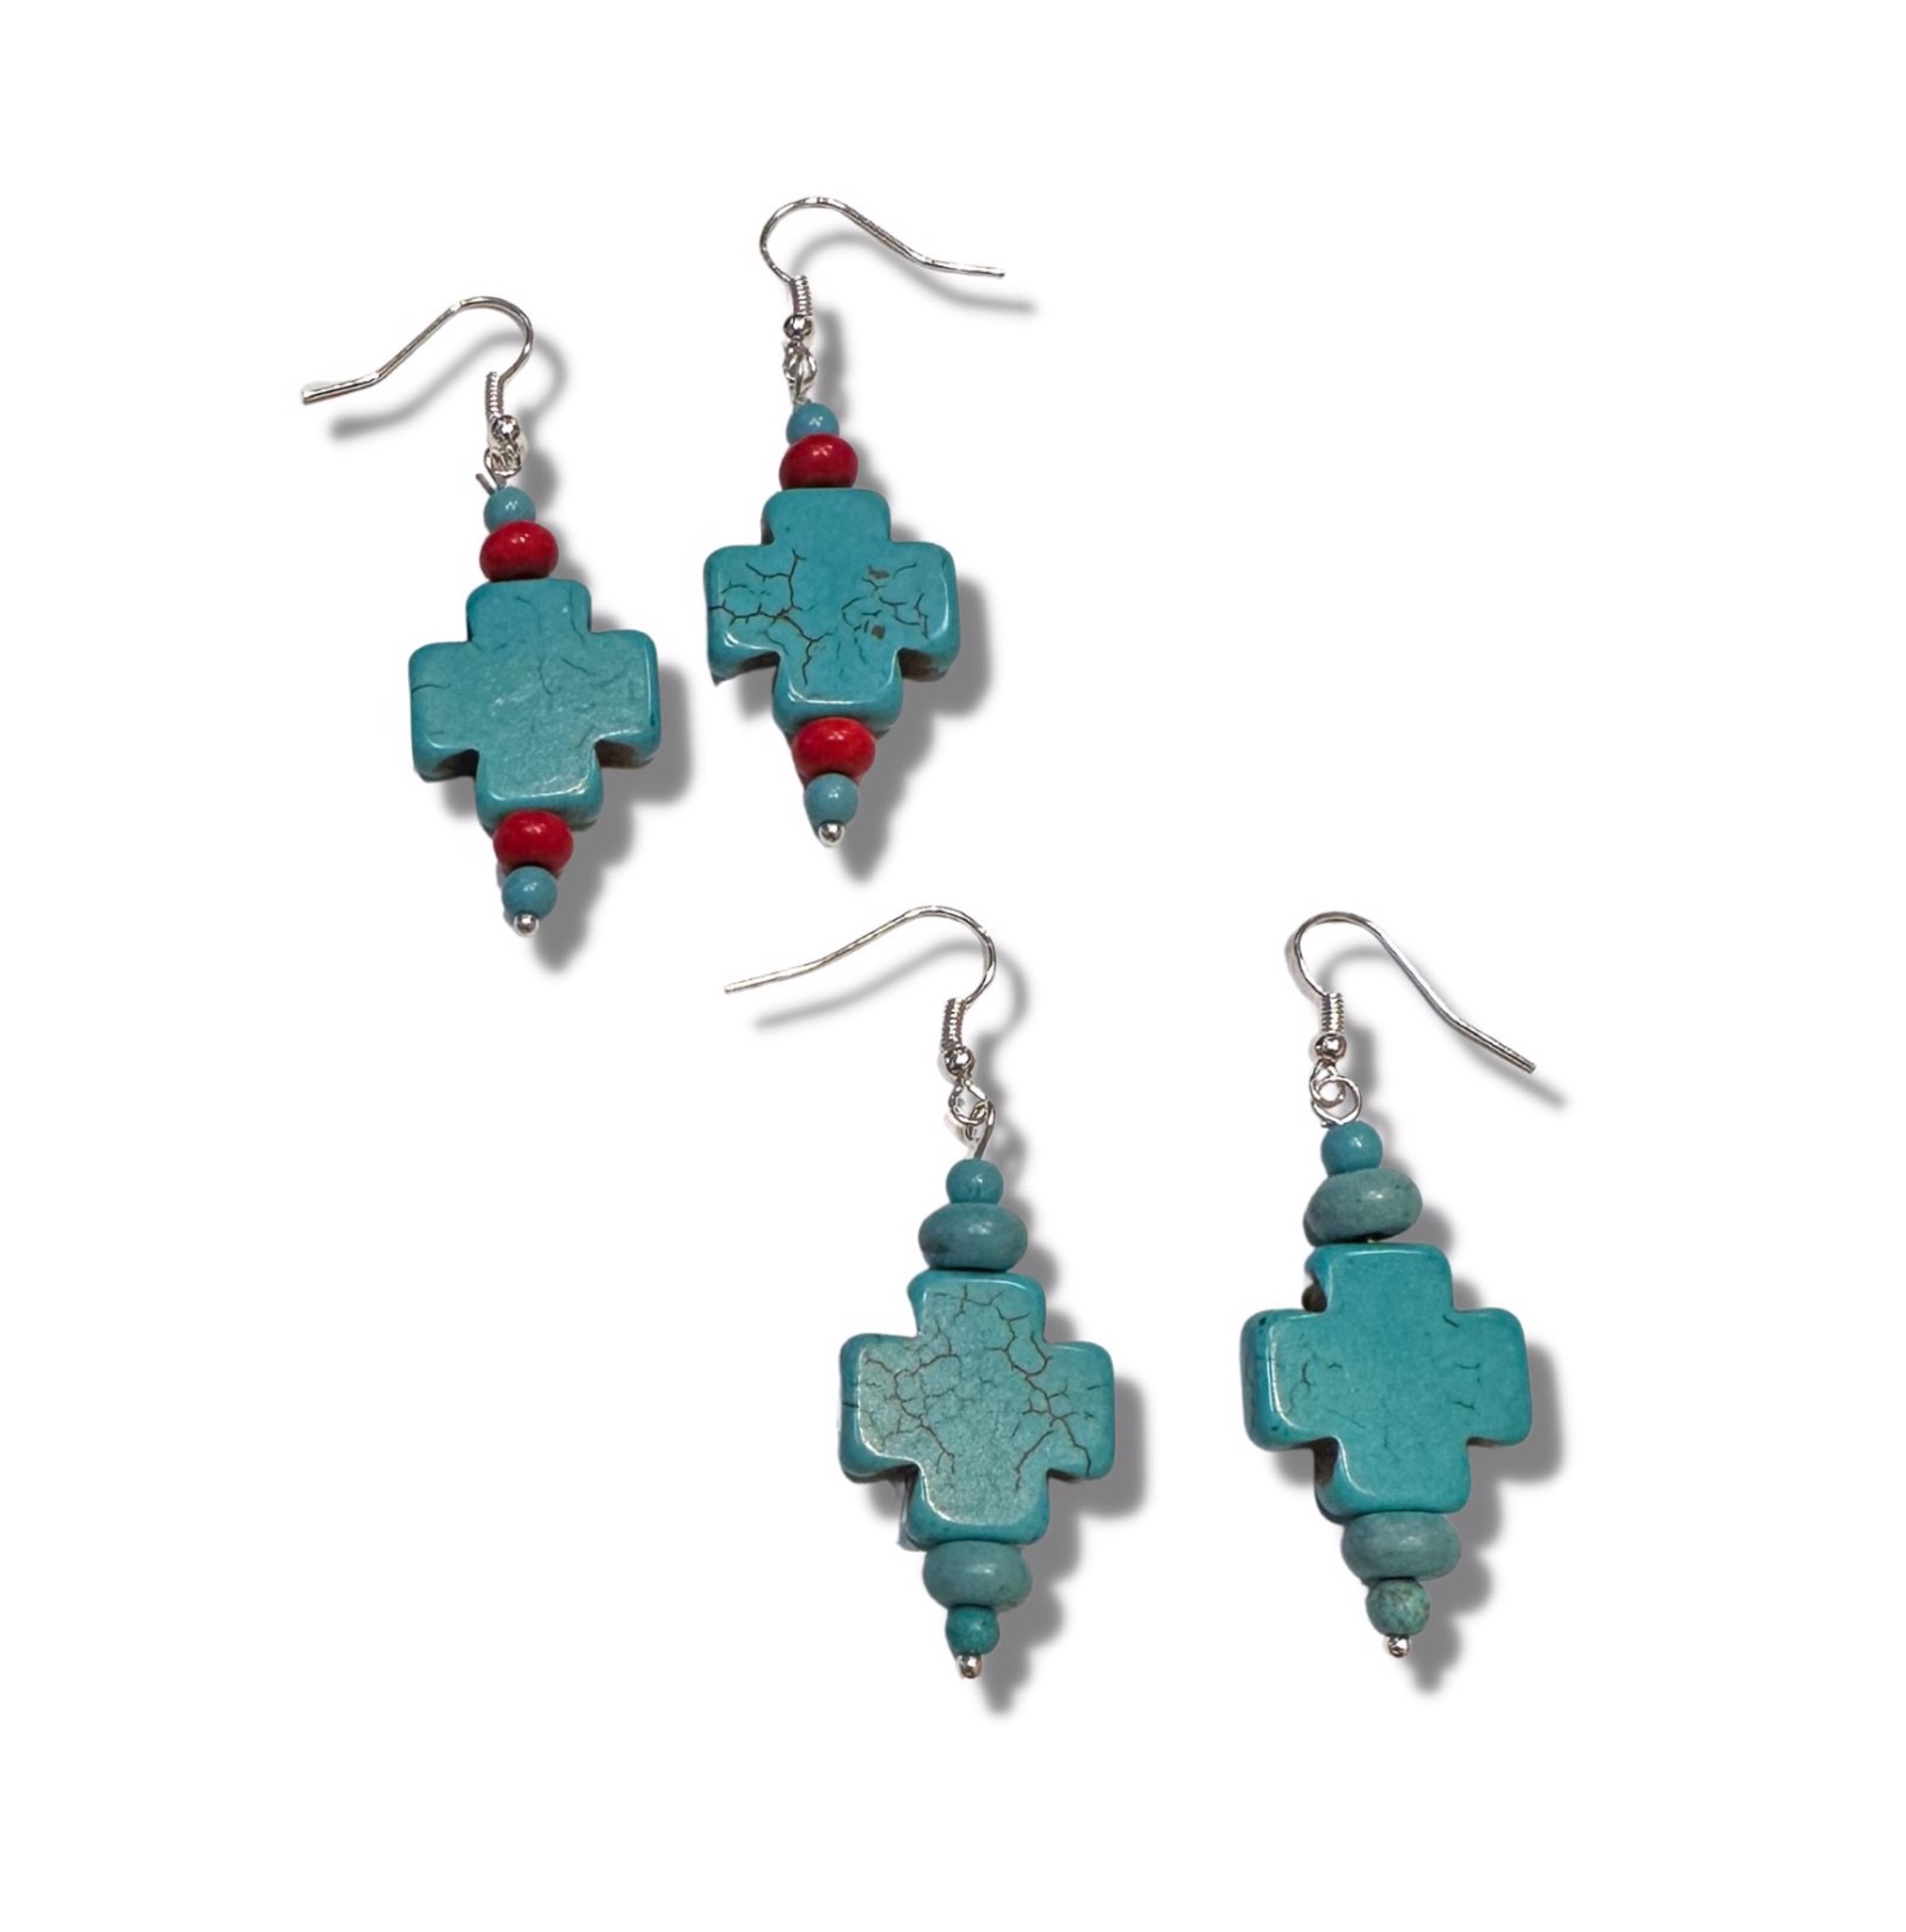 Earrings - Assorted Turquoise Crosses by Kai Cook